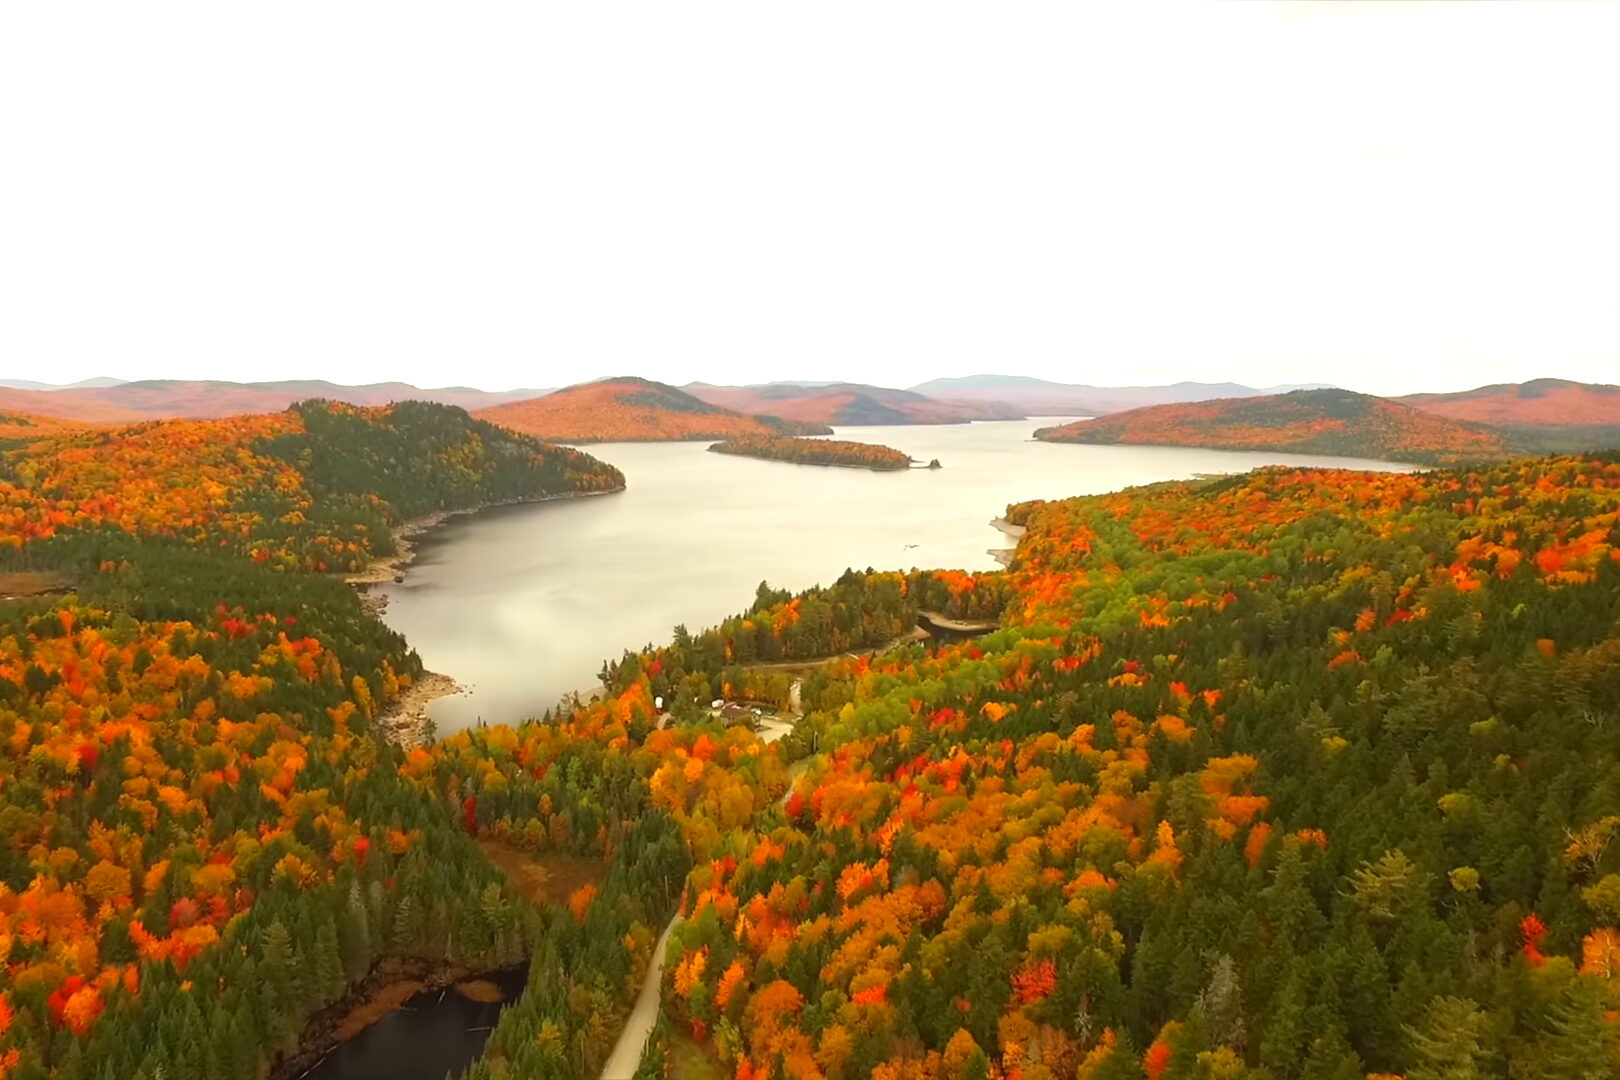 Rangeley Lakes National Scenic Byway in Maine